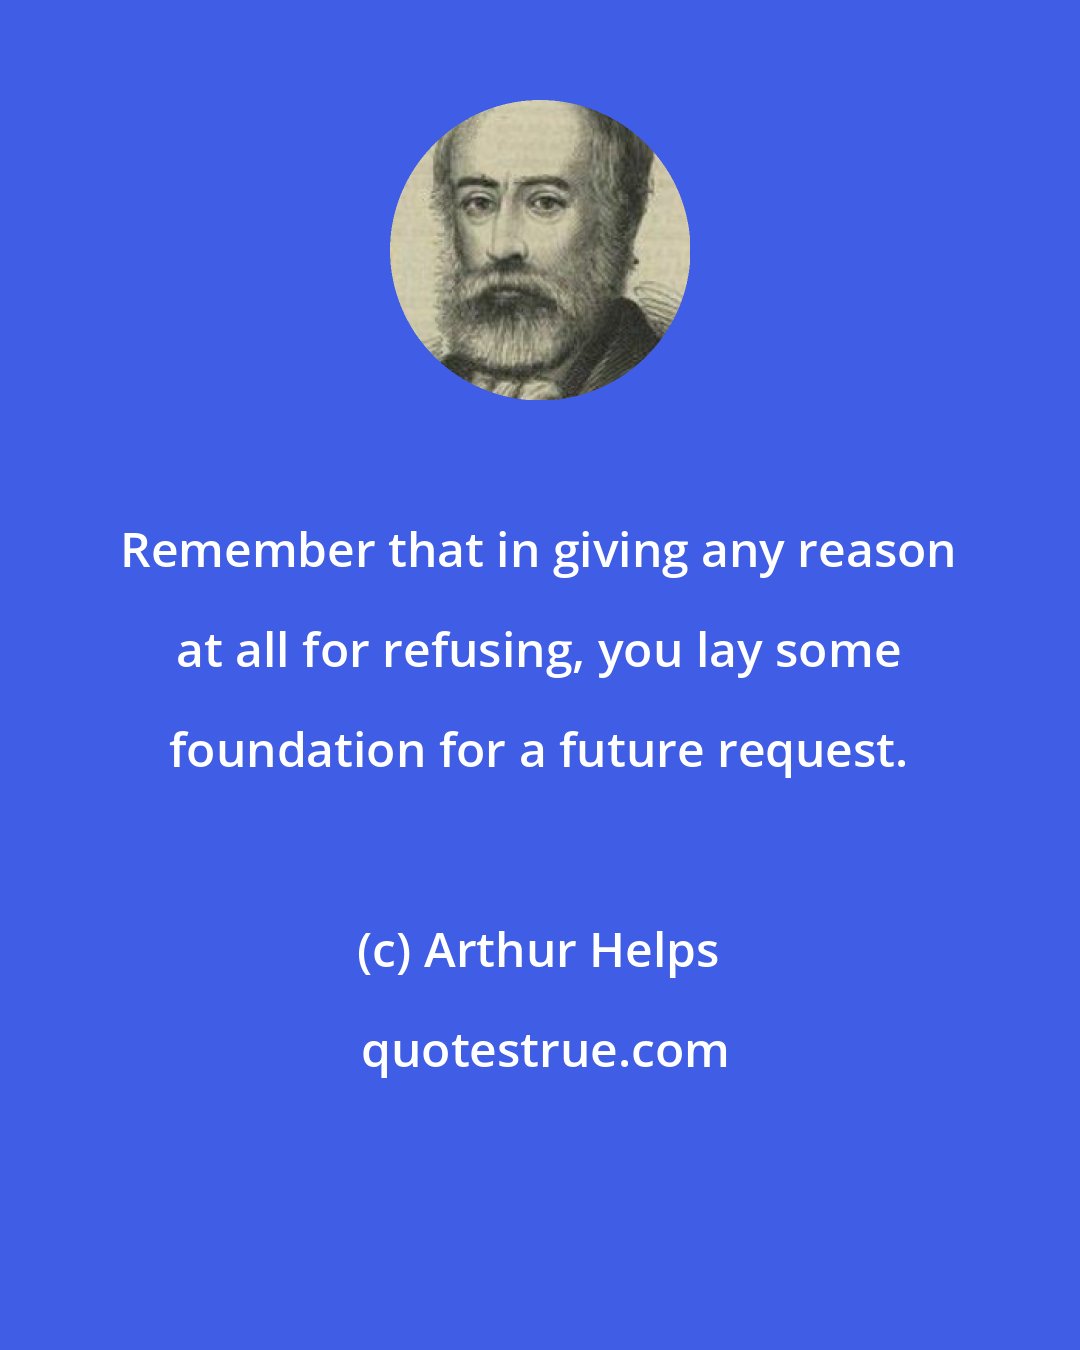 Arthur Helps: Remember that in giving any reason at all for refusing, you lay some foundation for a future request.